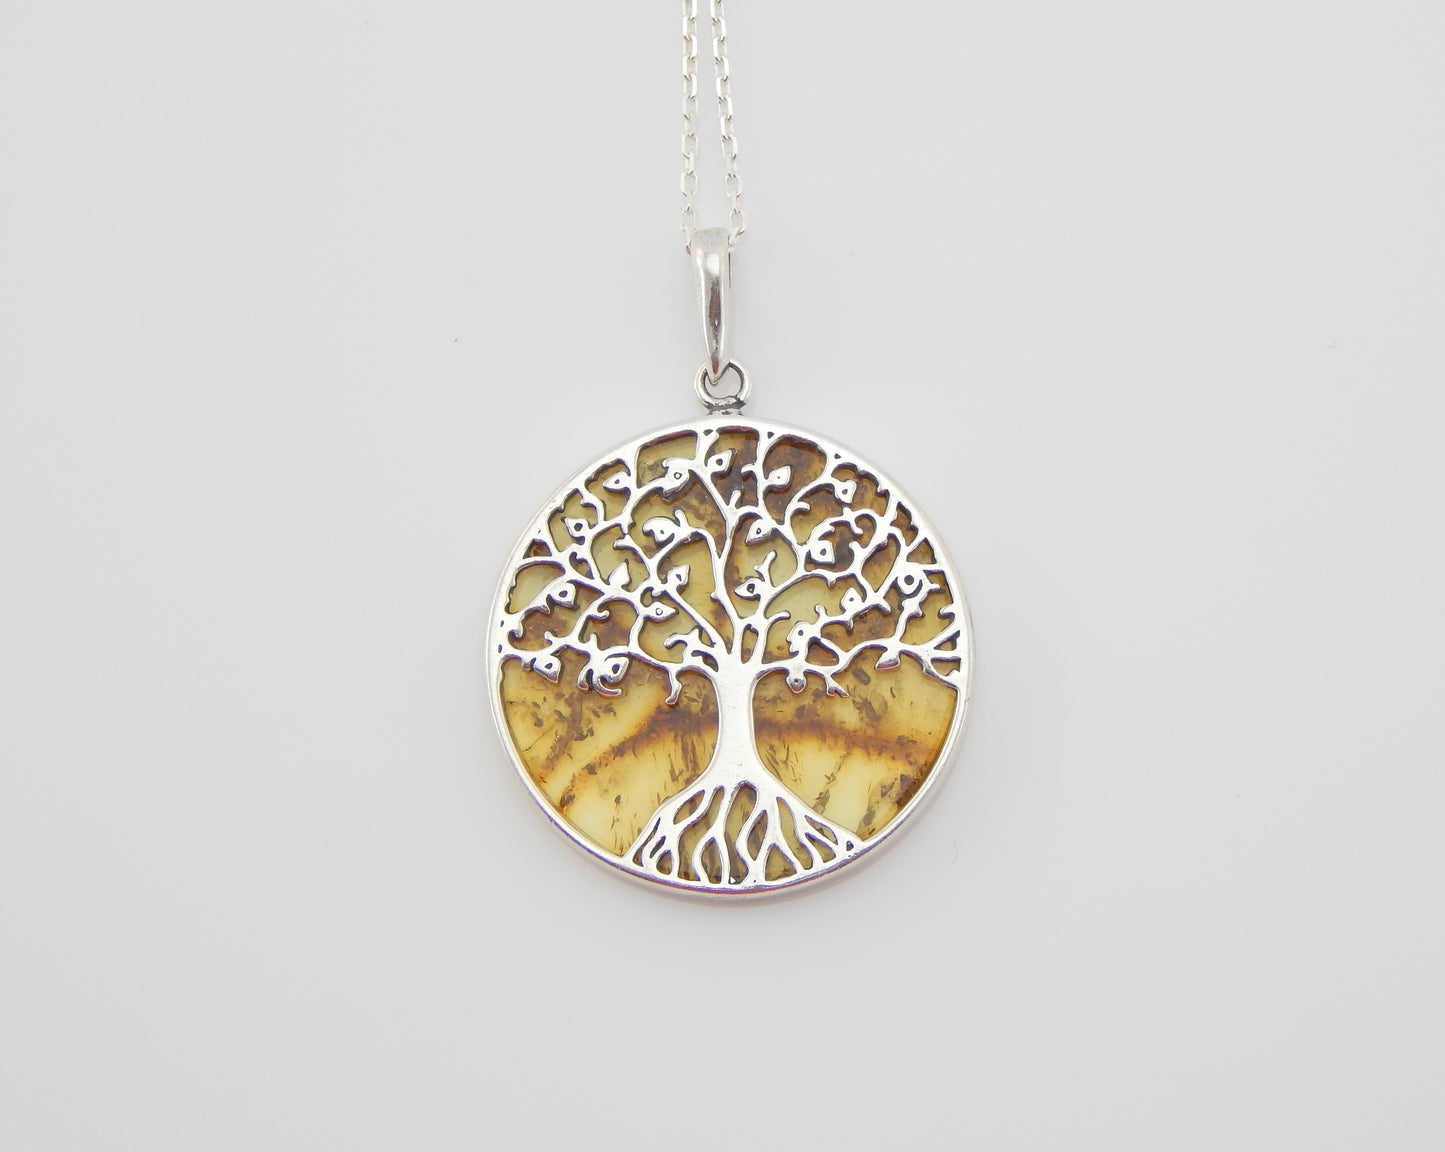 Natural Baltic Lemon Amber Tree Of Life Pendant Necklace in 925 Sterling Silver